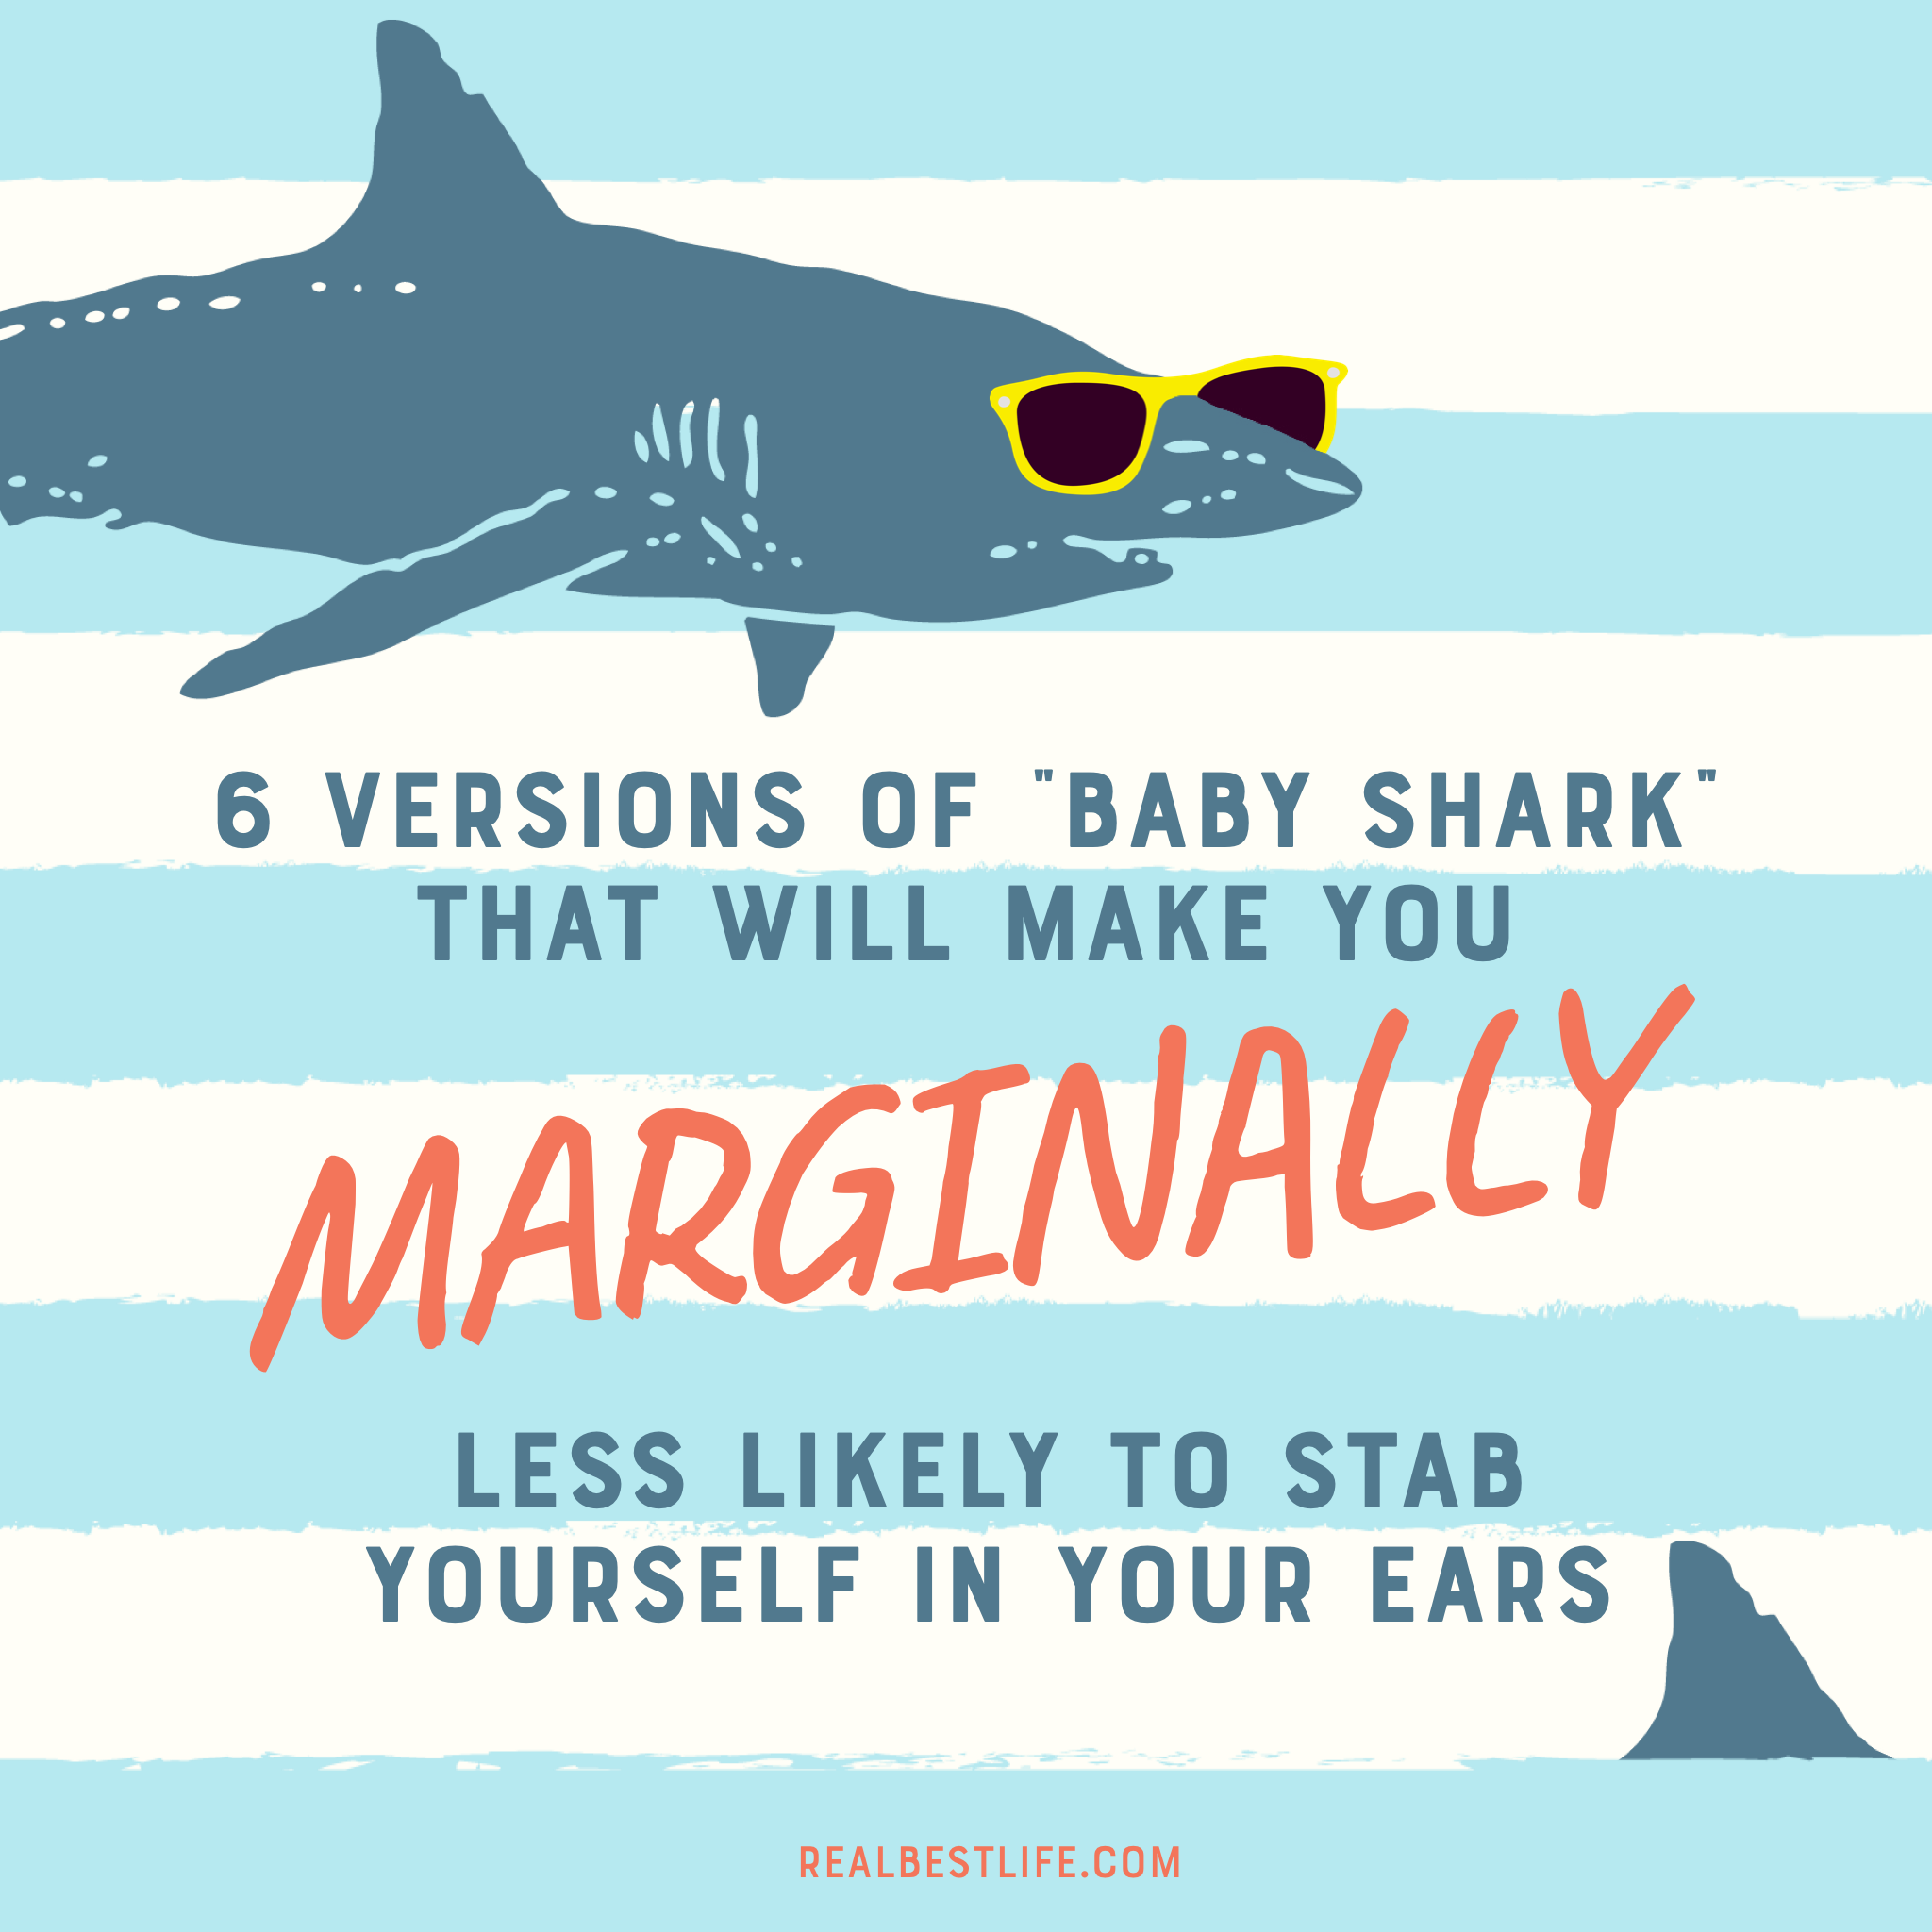 Six versions of “Baby Shark” that will make you marginally​​ less likely to stab yourself in the ears